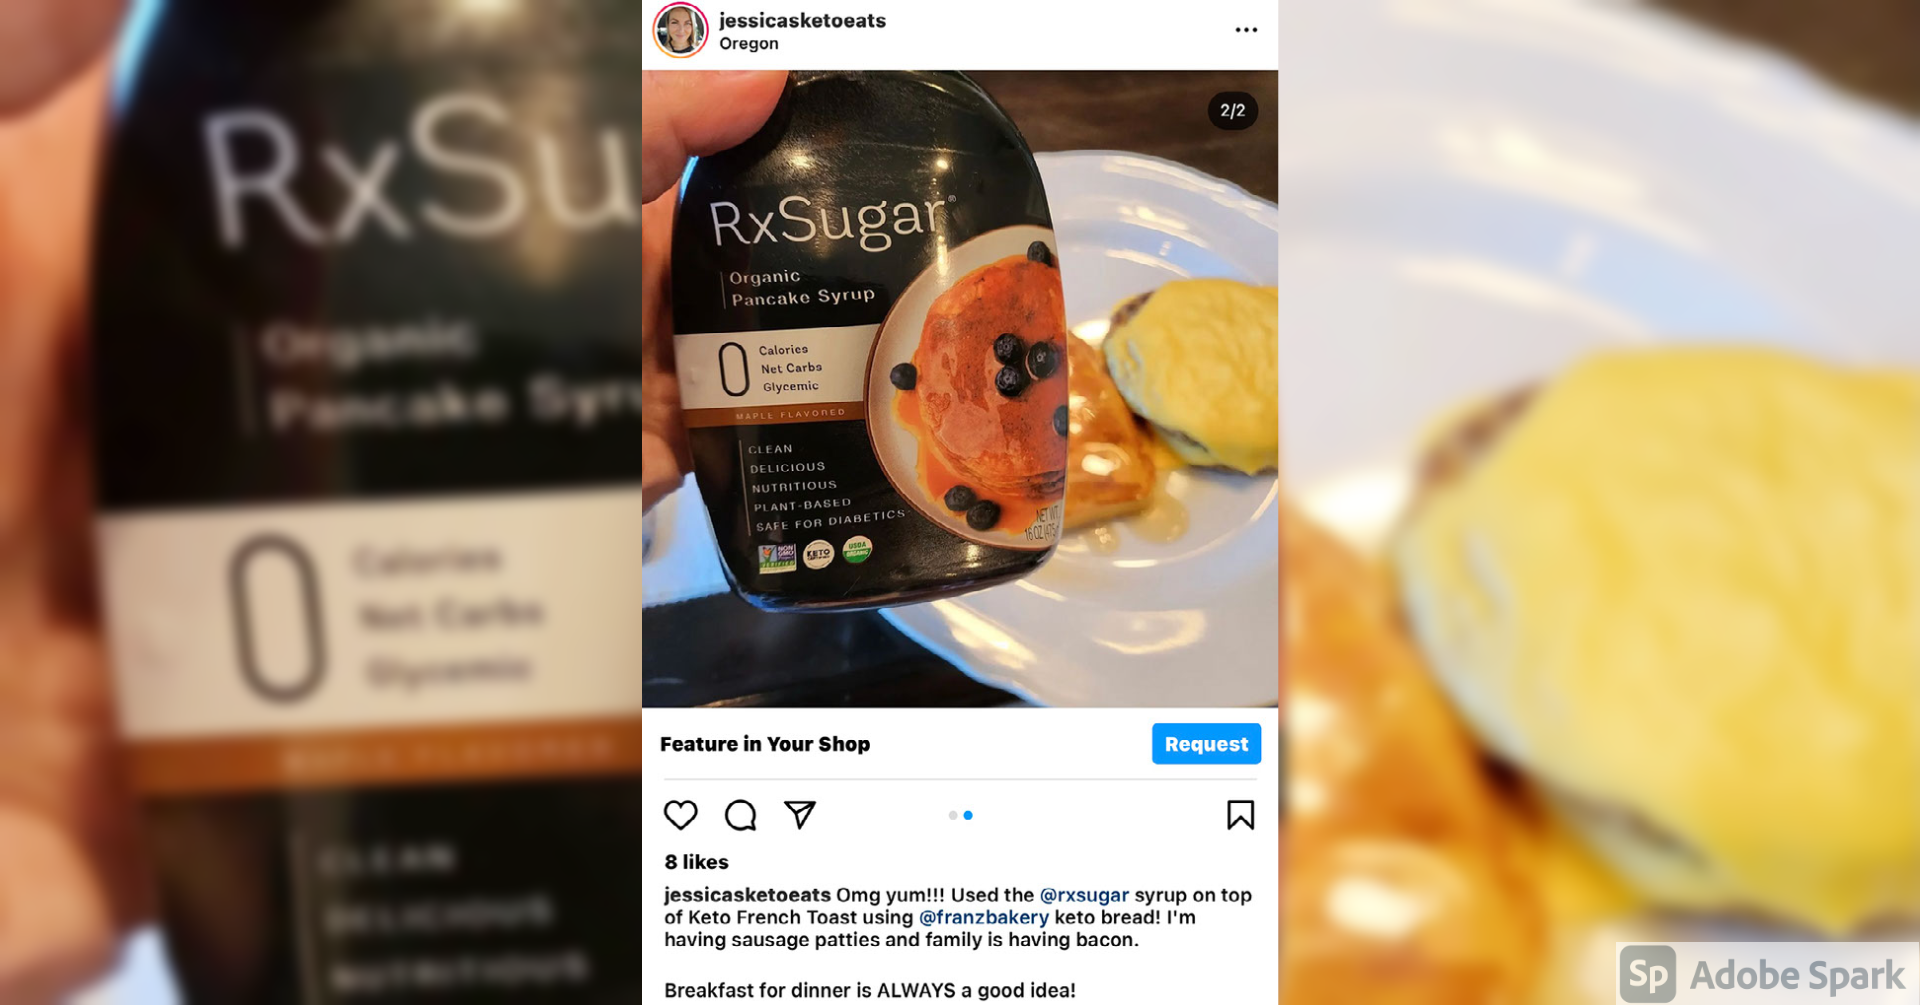 Jessicasketoeats Using Her RxSugar Organic Pancake Syrup On Top Of Some Keto French Toast!!